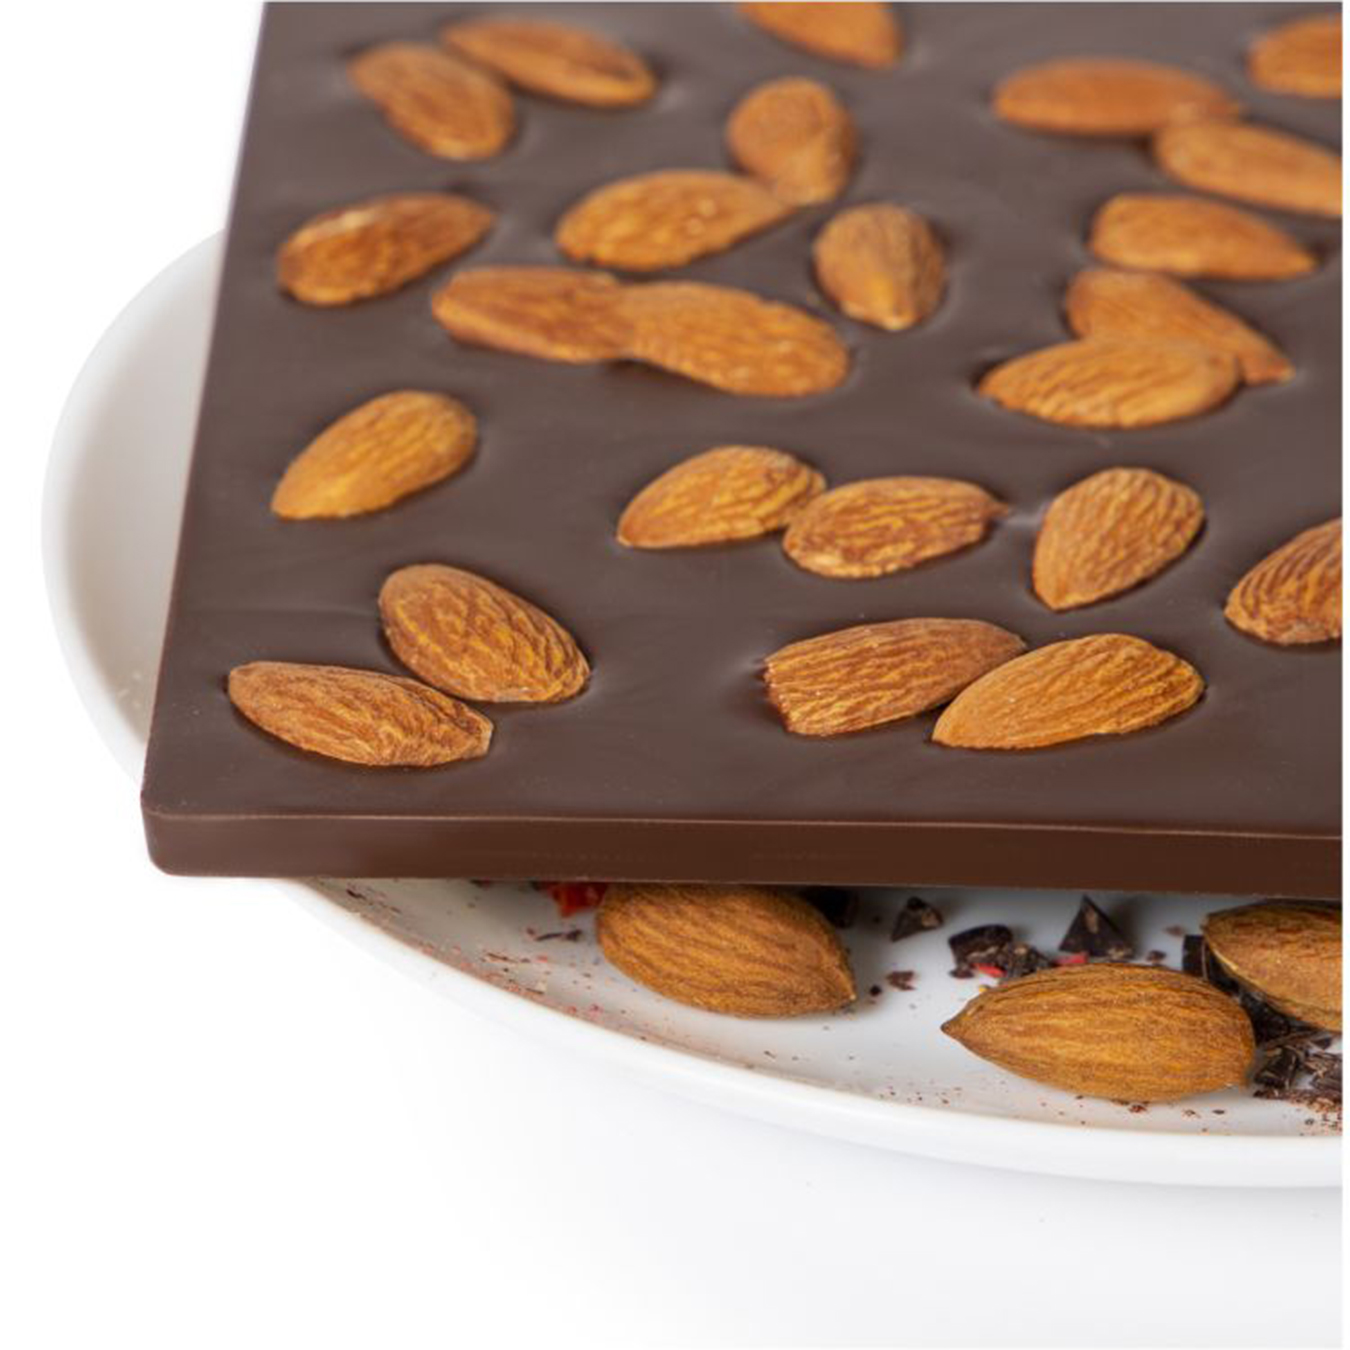 Chocolate Masters chocolate black with almonds